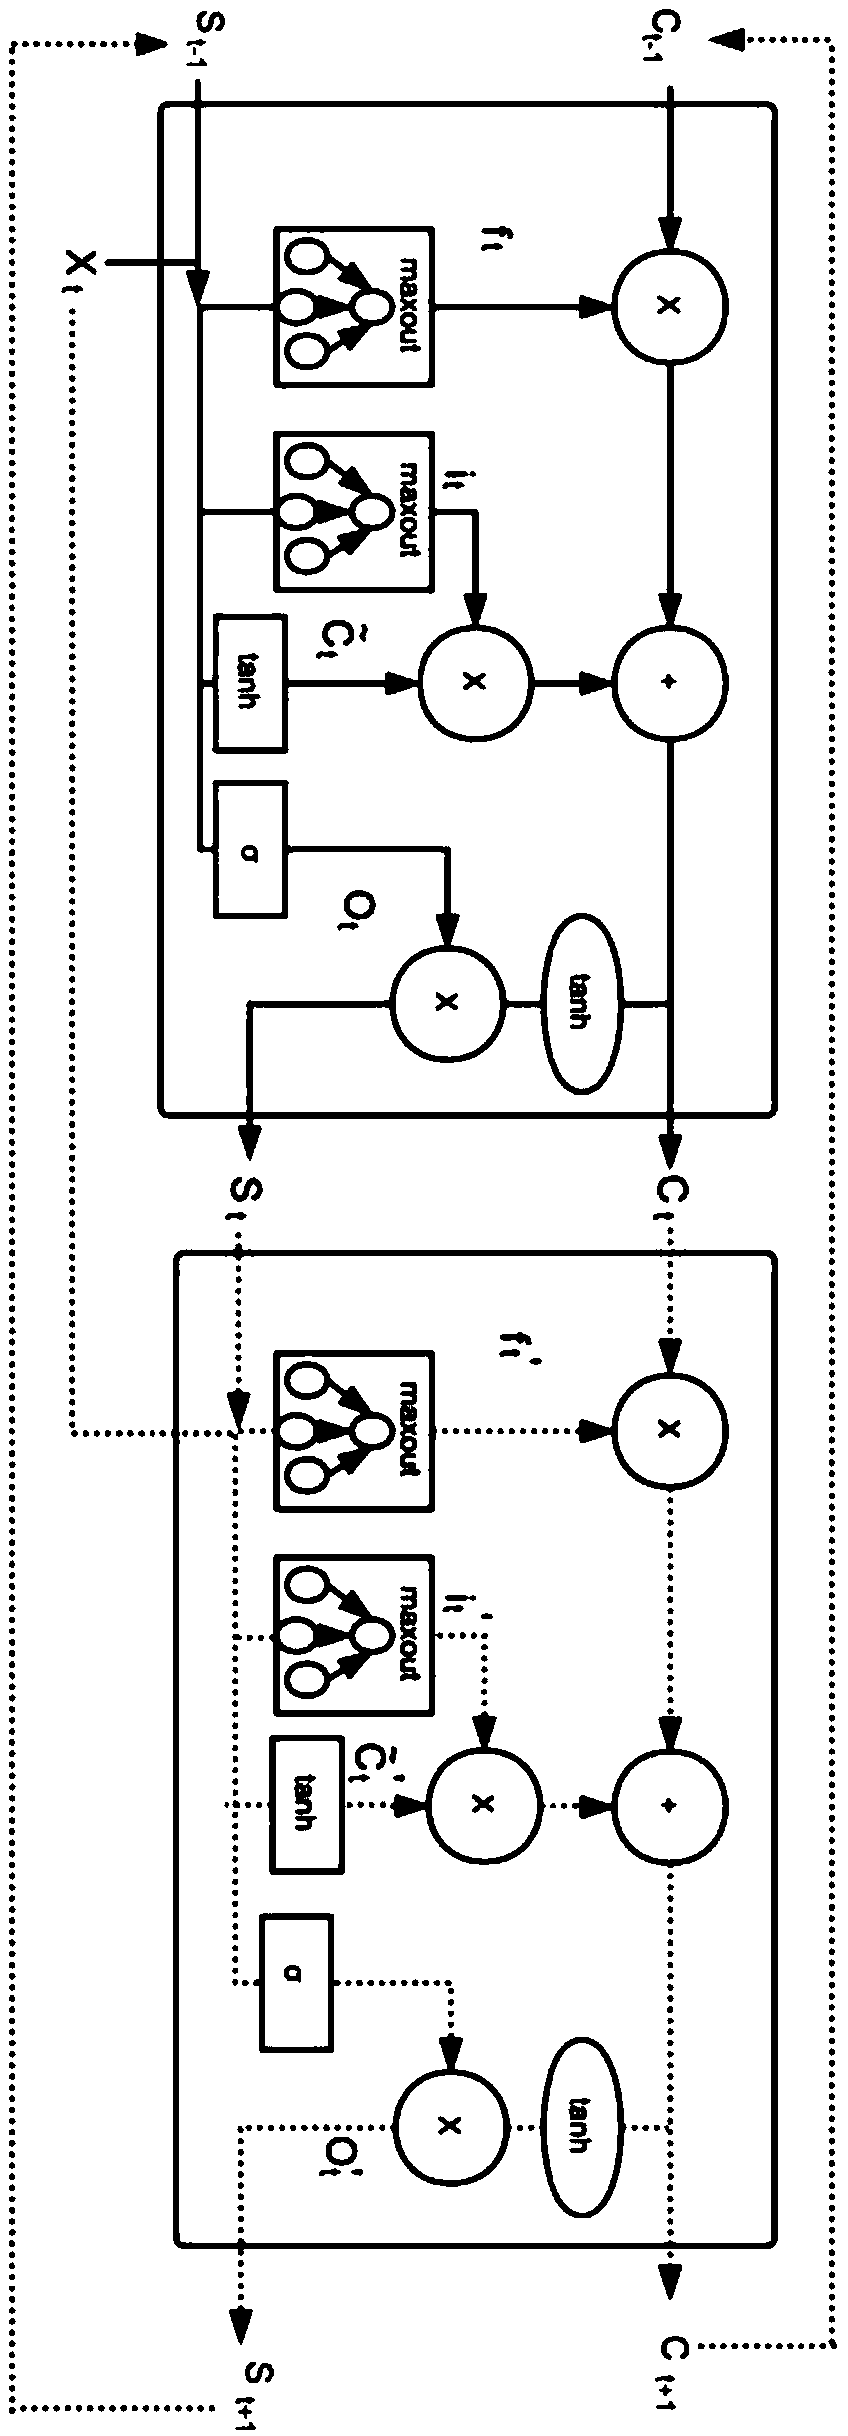 Speech recognition method based on model pre-training and bidirectional LSTM